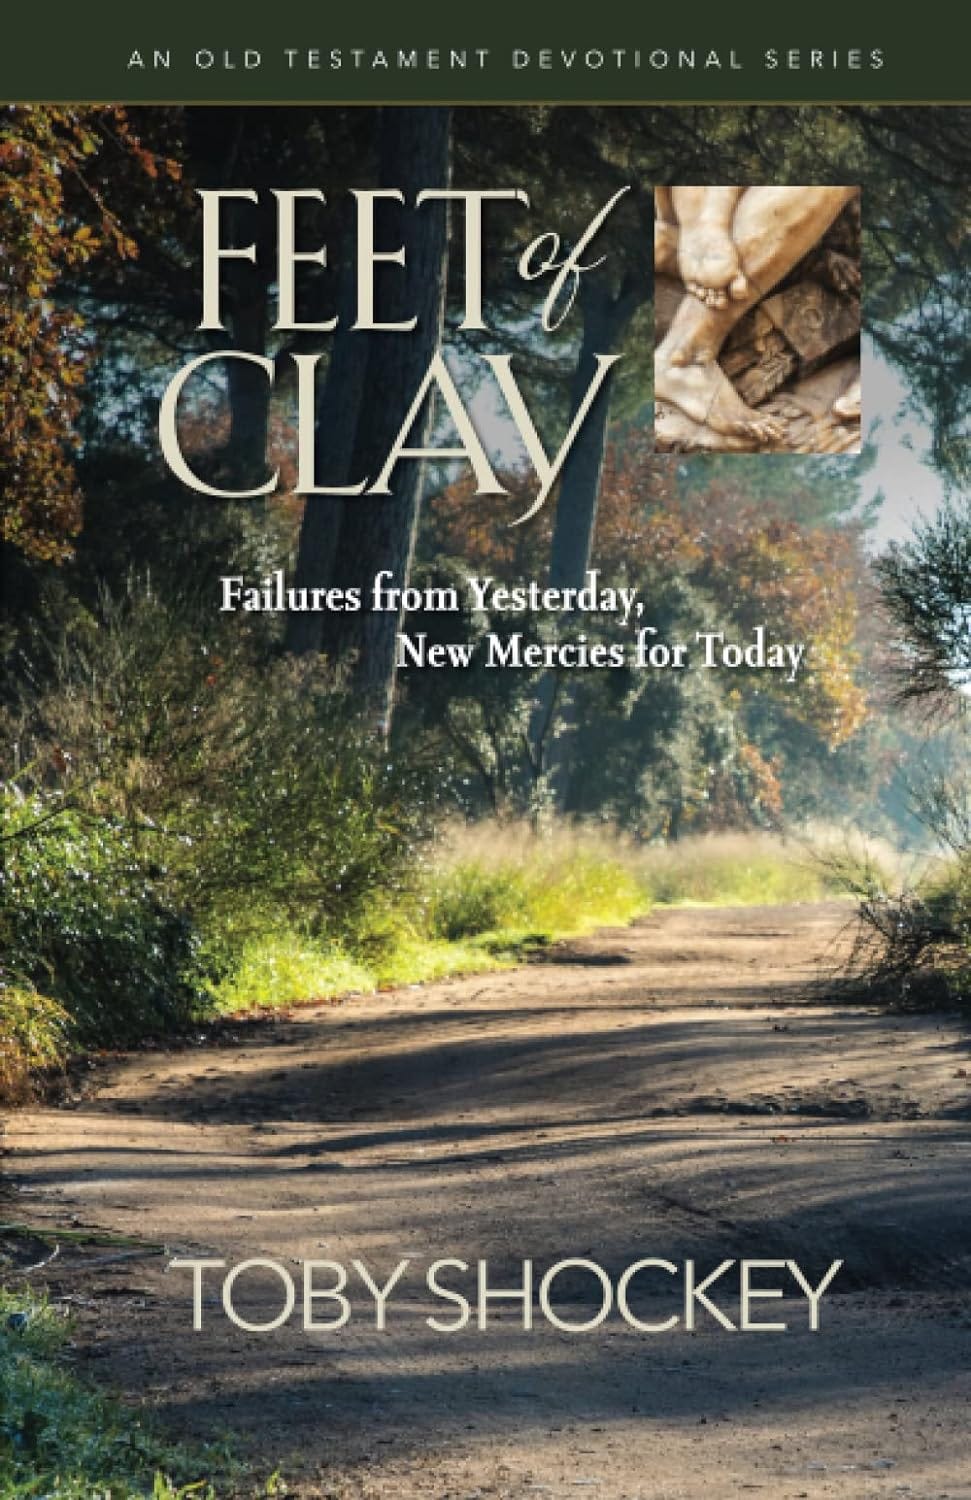 Image of the book cover to Feet of Clay by Toby Shockey.